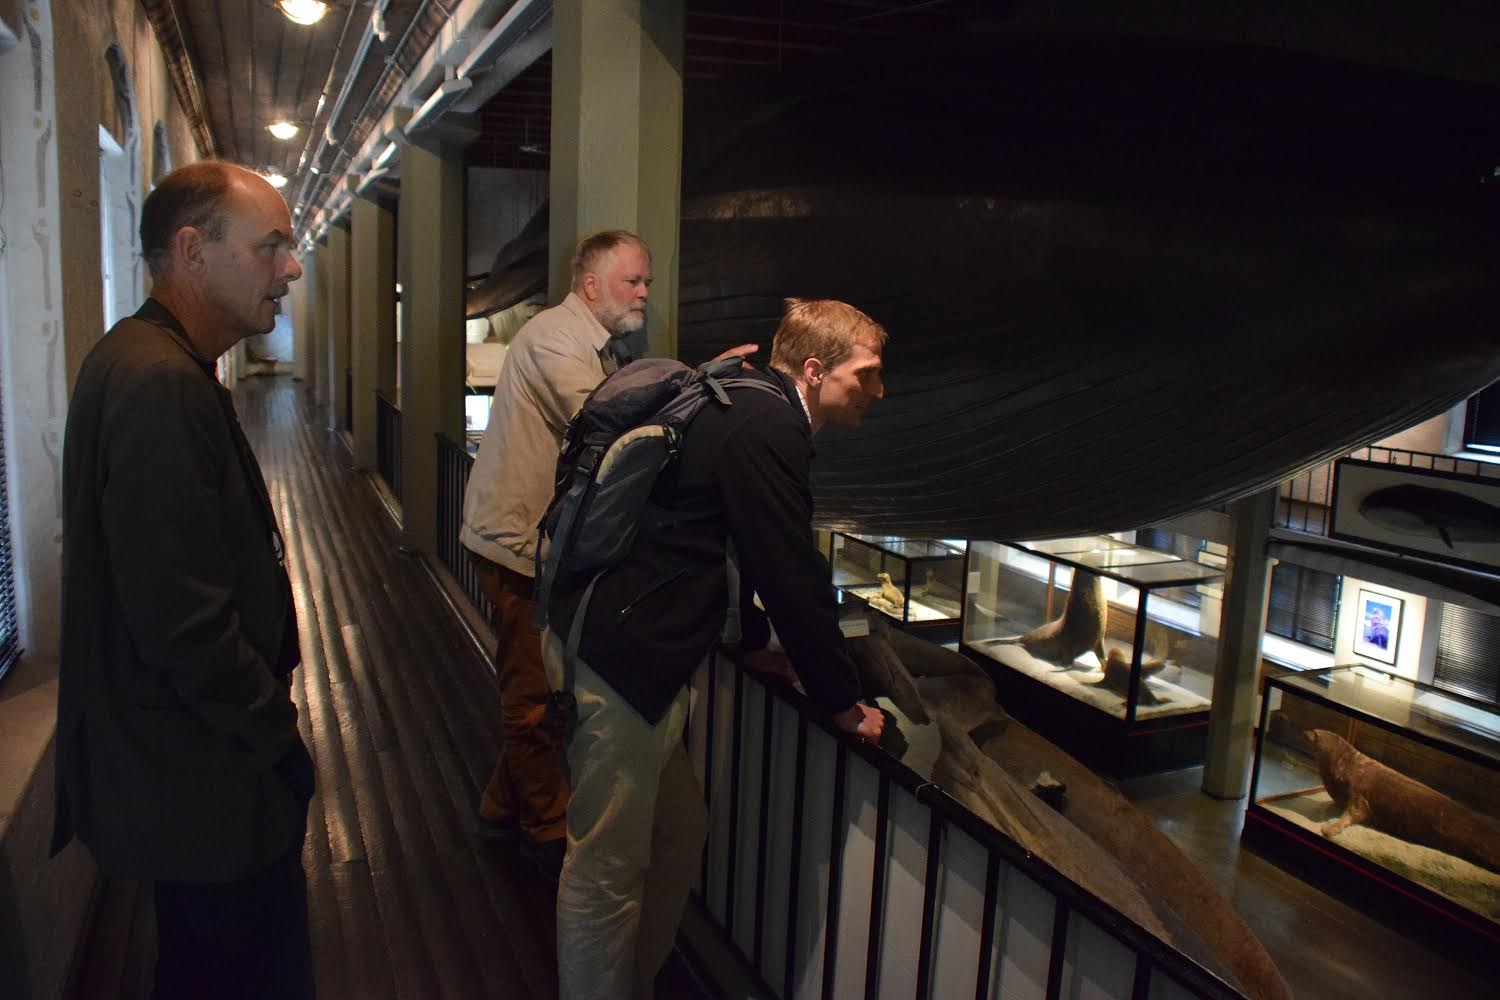 A guided tour of the Sandefjord Whaling Museum, with Stig Tore Lunde.